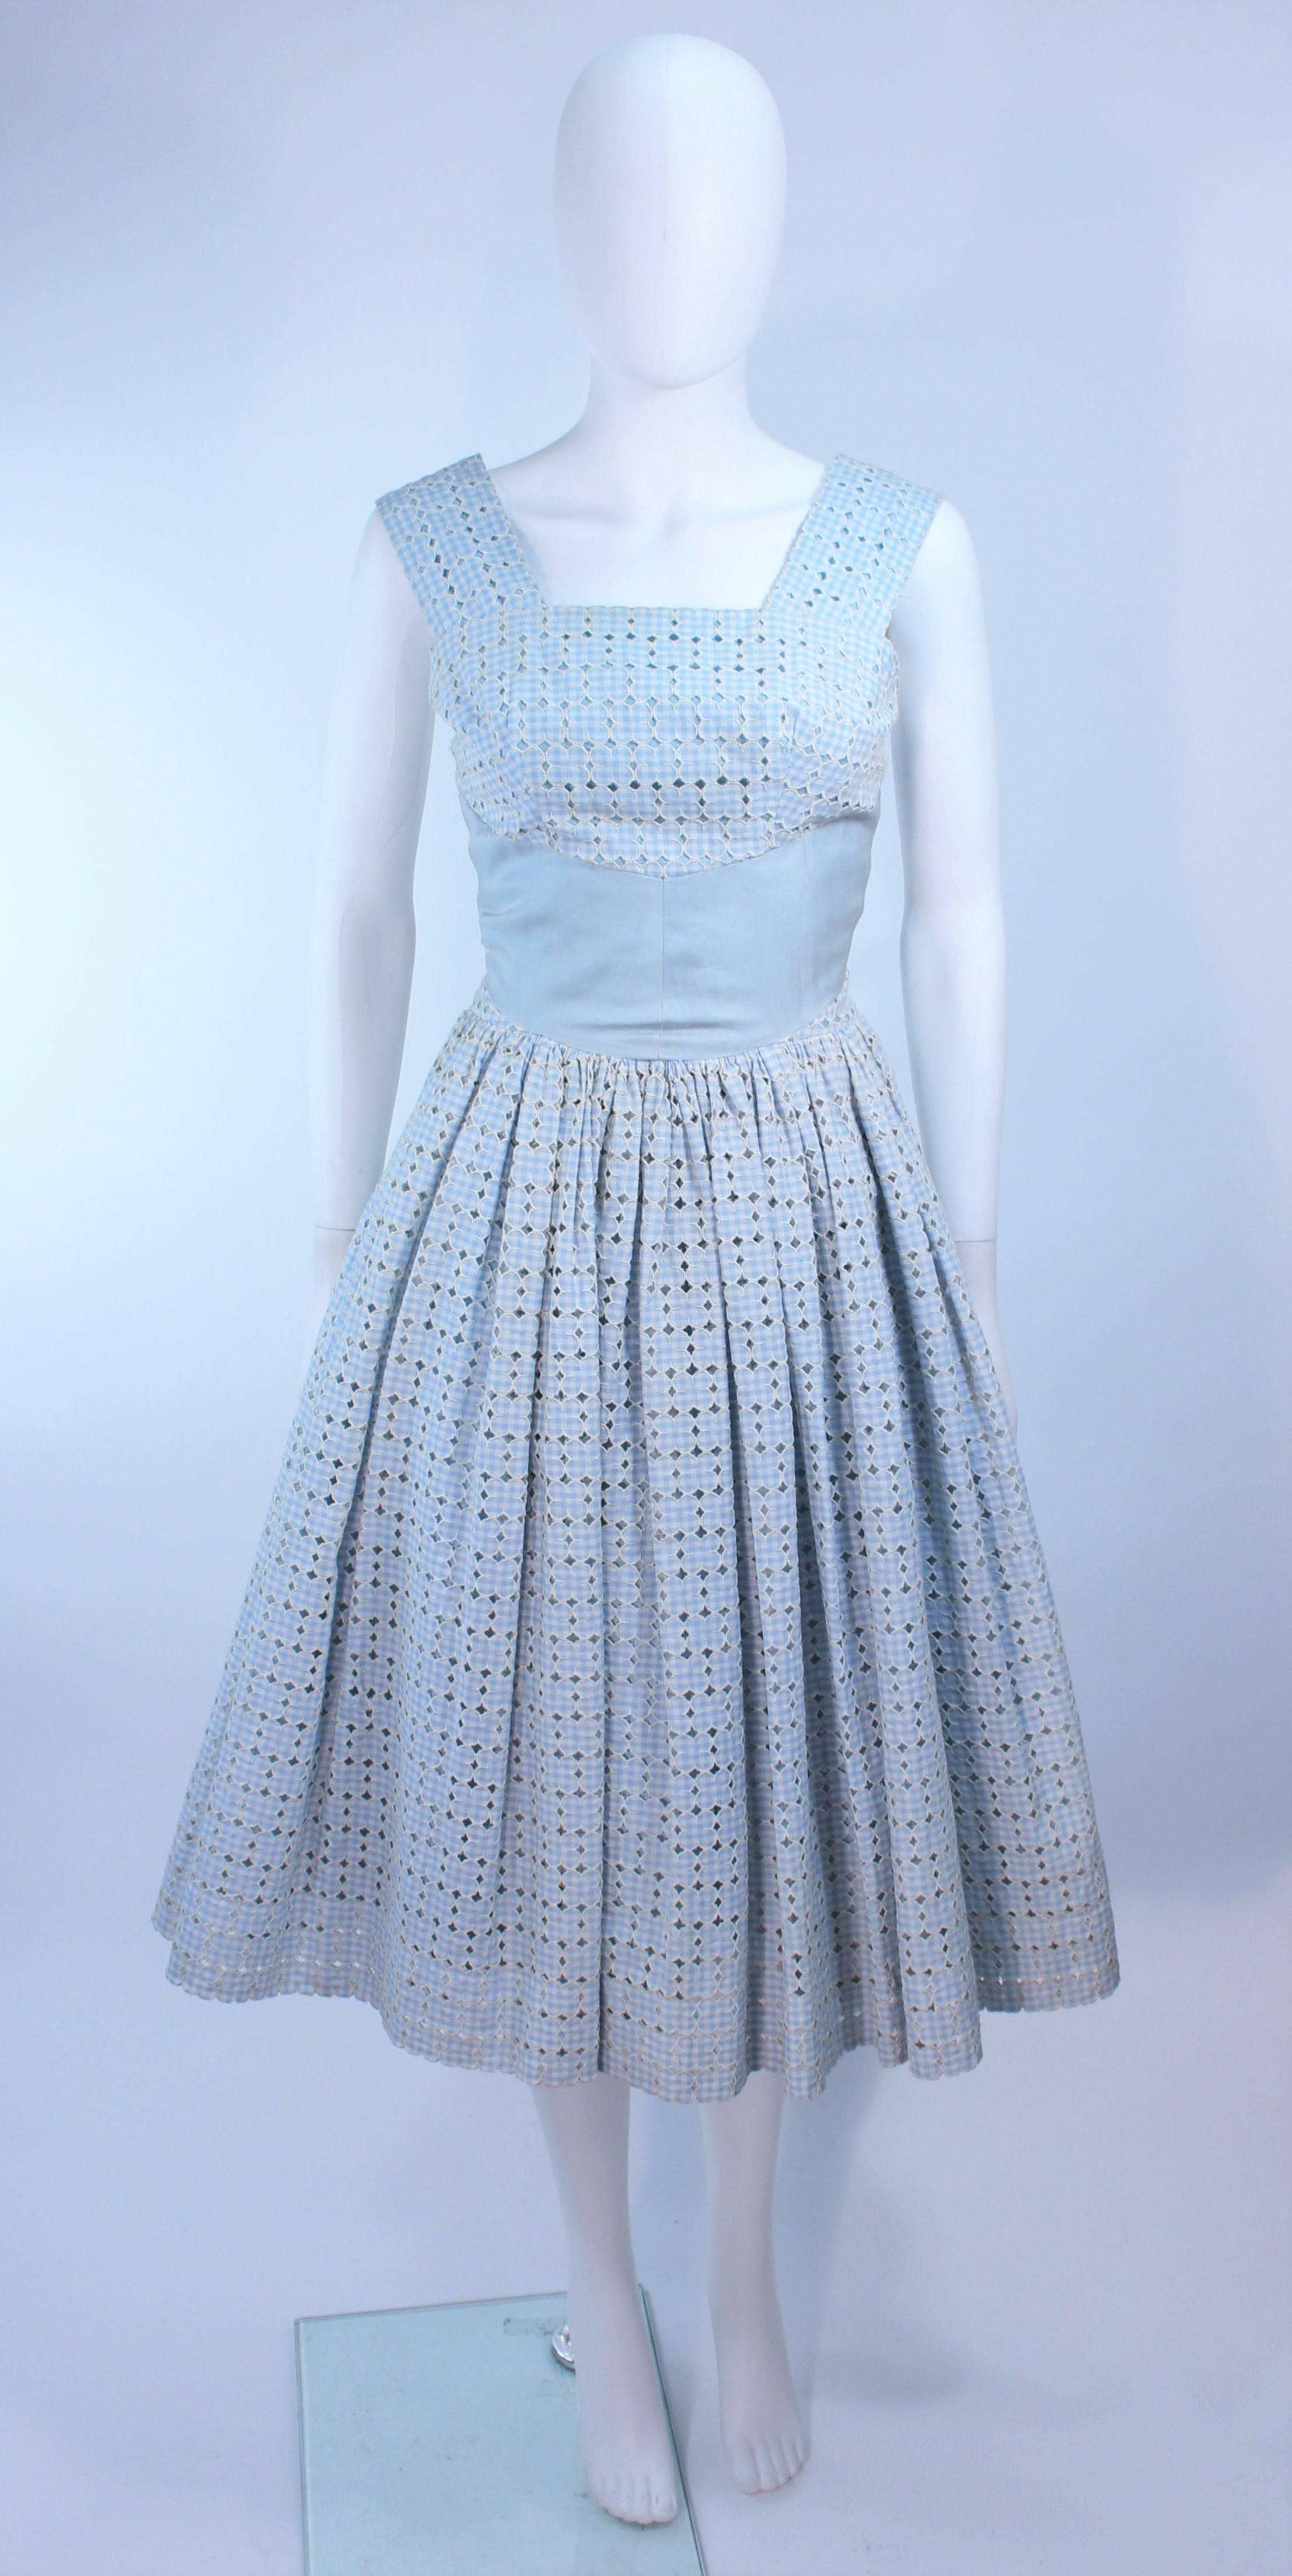 This dress is composed of a blue and white eyelet cotton. Features a zipper closure. In excellent condition. Shot with crinoline (not included).

**Please cross-reference measurements for personal accuracy. Size in description box is an